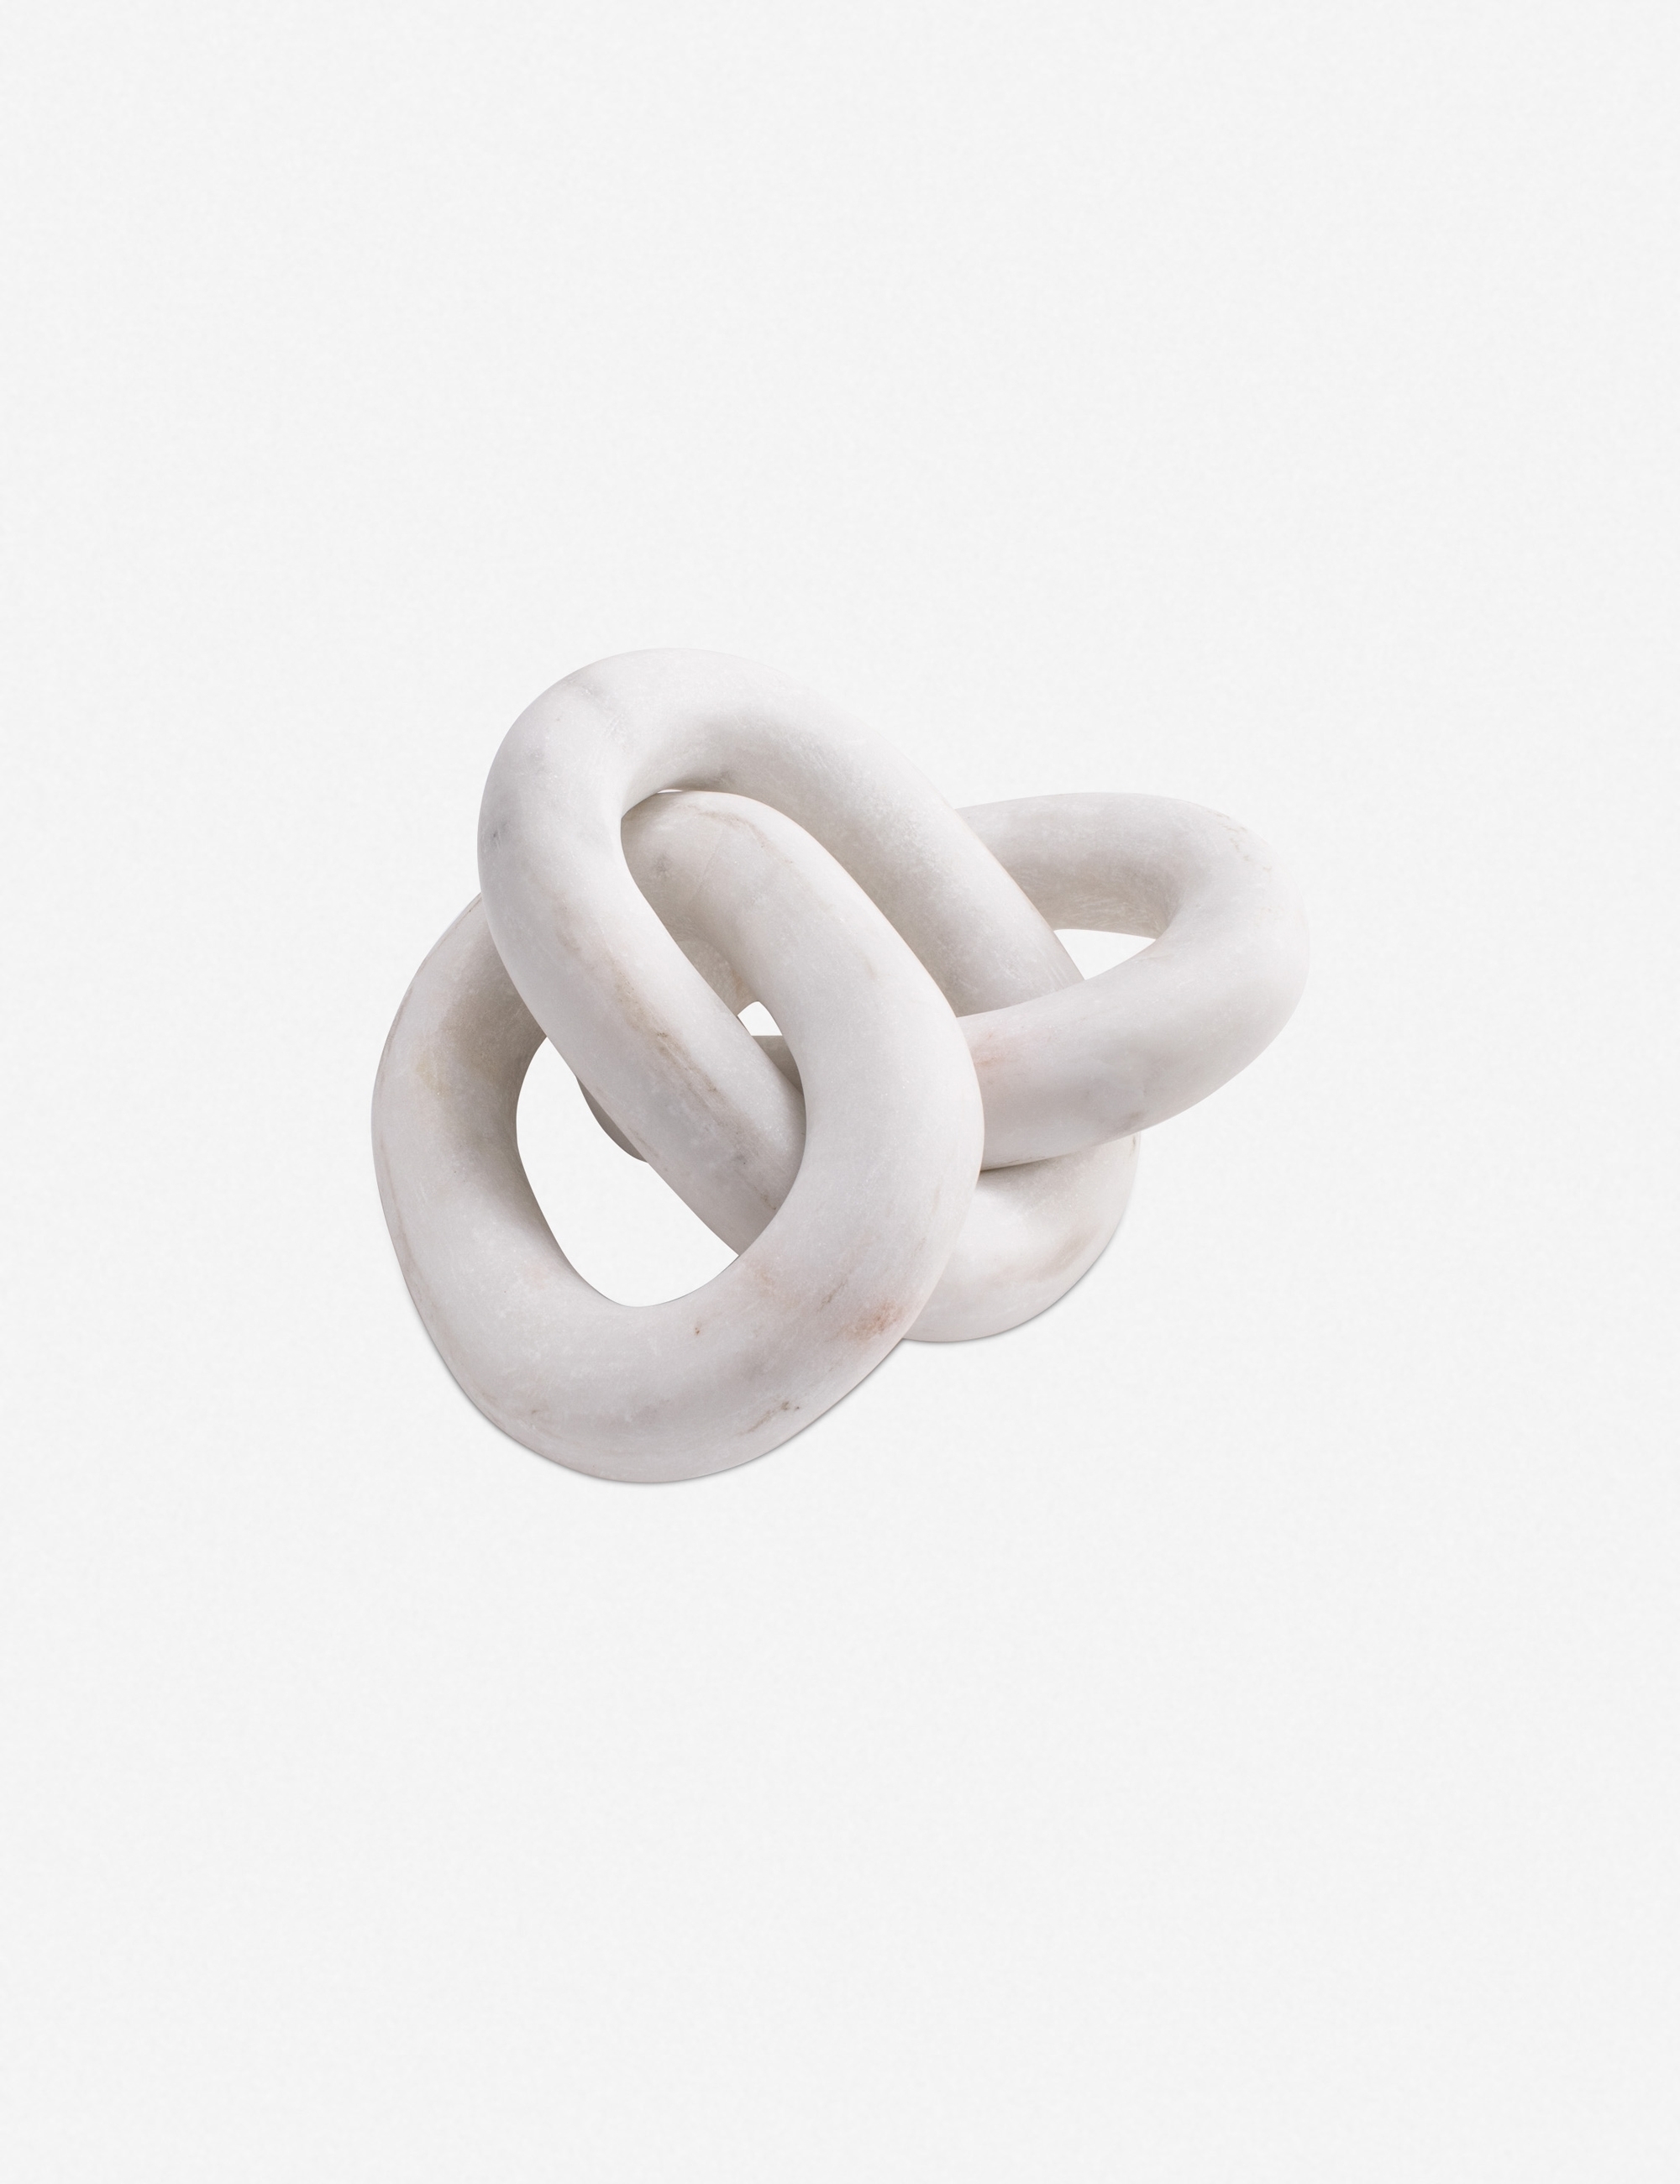 Atlas Marble Chain by Regina Andrew - Image 1